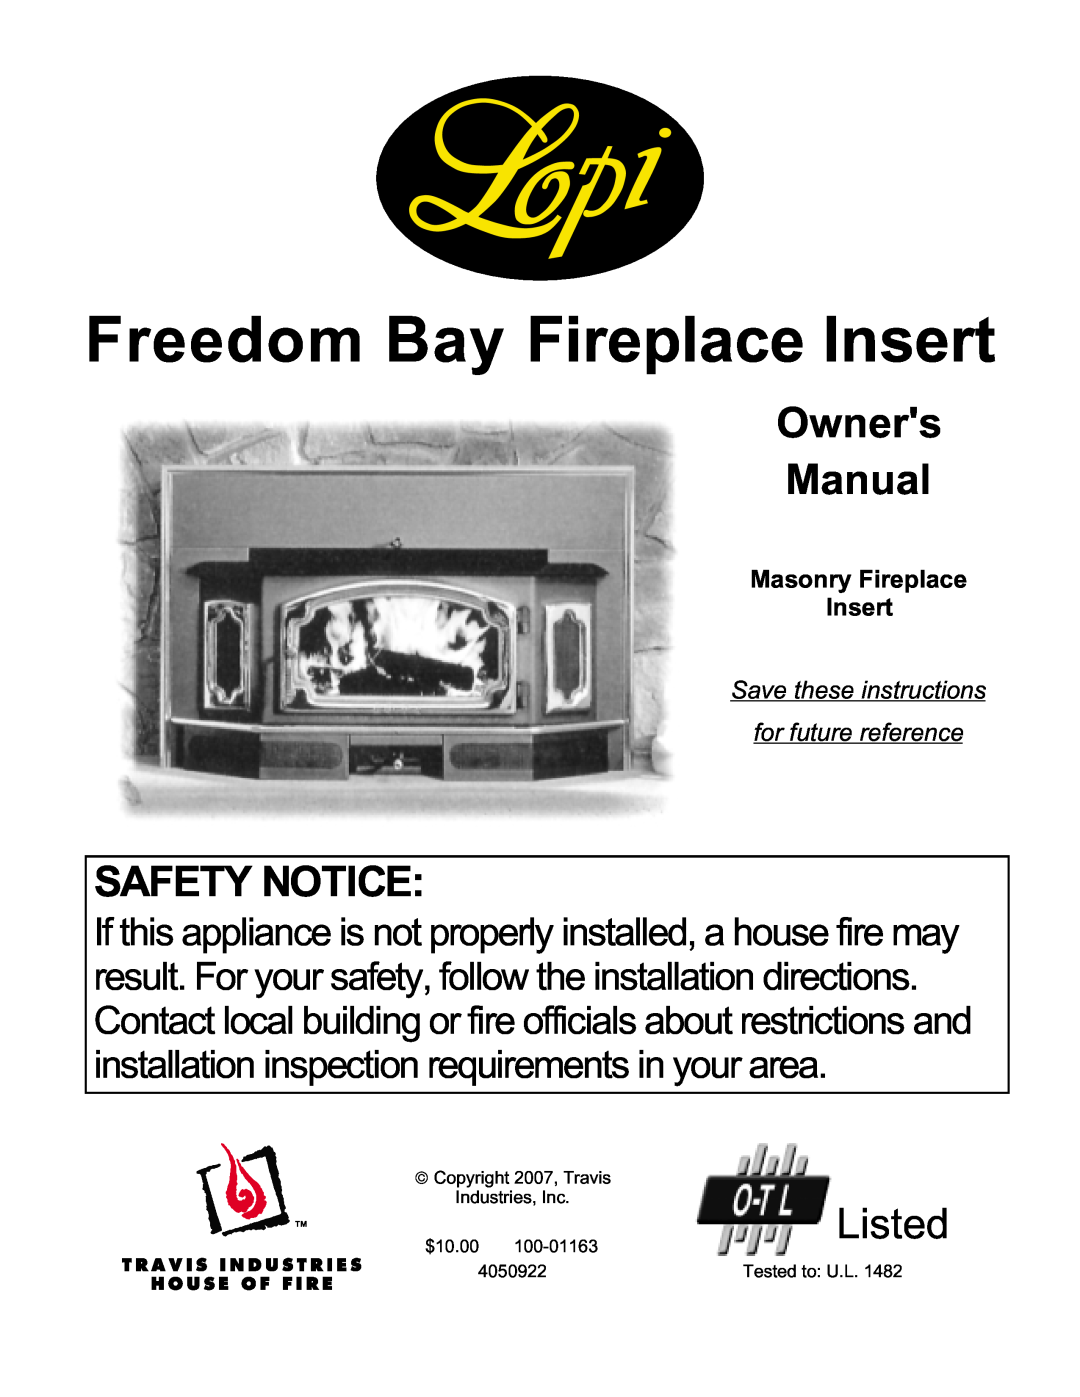 Lopi Freedom Bay Fireplace Insert owner manual Safety Notice, Listed 